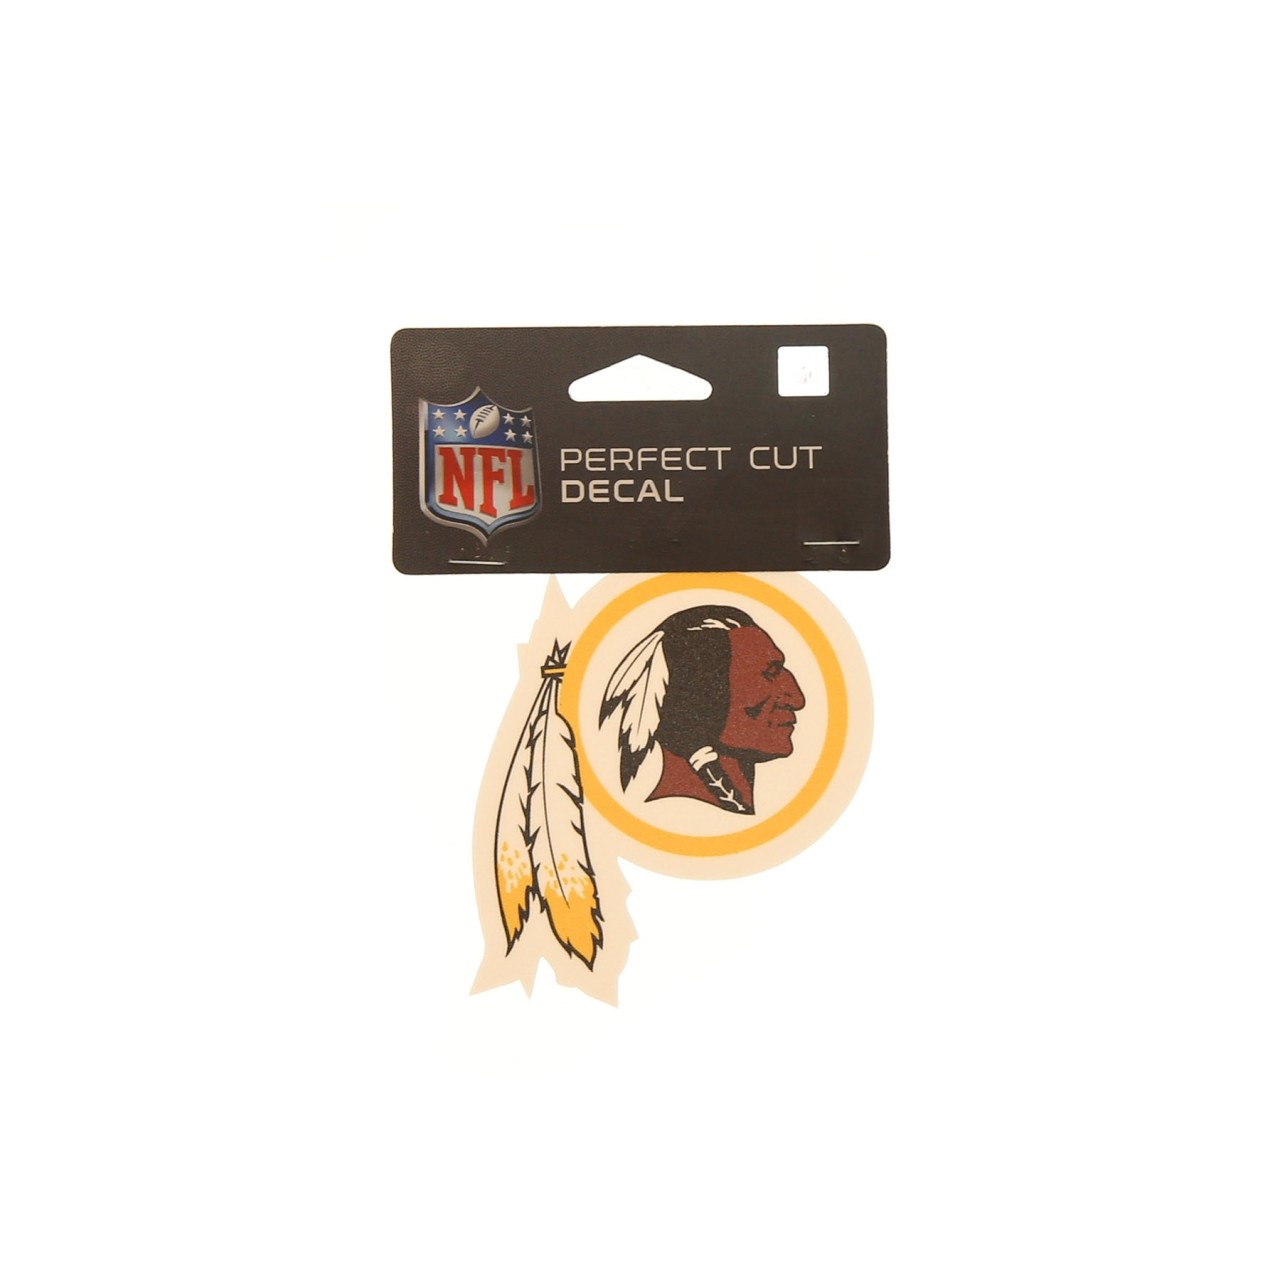 WINCRAFT NFL DECAL LOGO WASRED 100032085631022